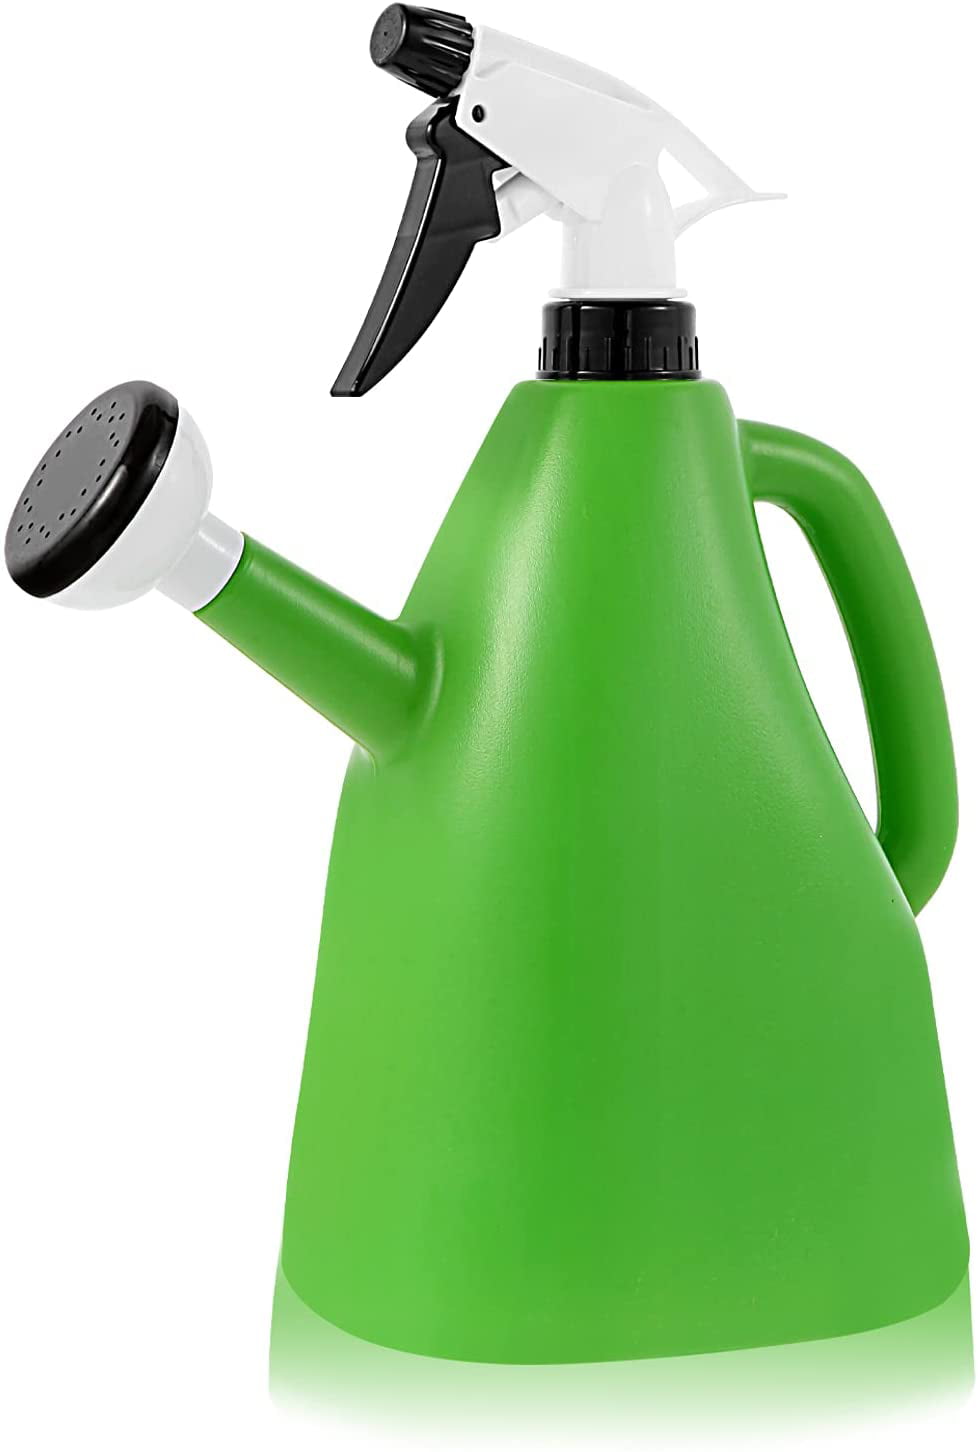 New Plastic Watering Can Plants Water Sprayer Garden Outdoor Easy Pouring